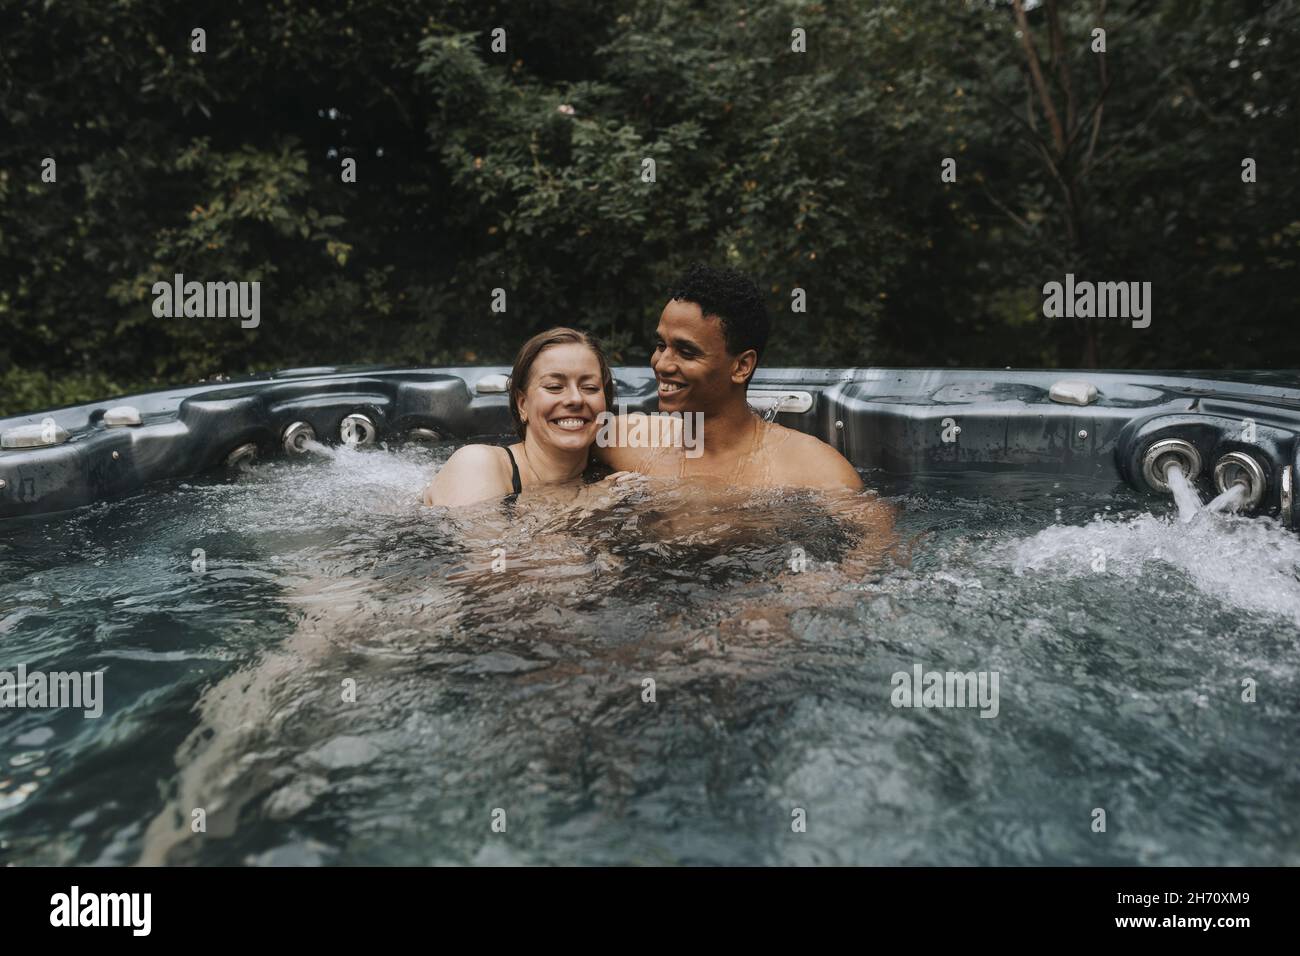 Couple relaxing in jacuzzi Banque D'Images